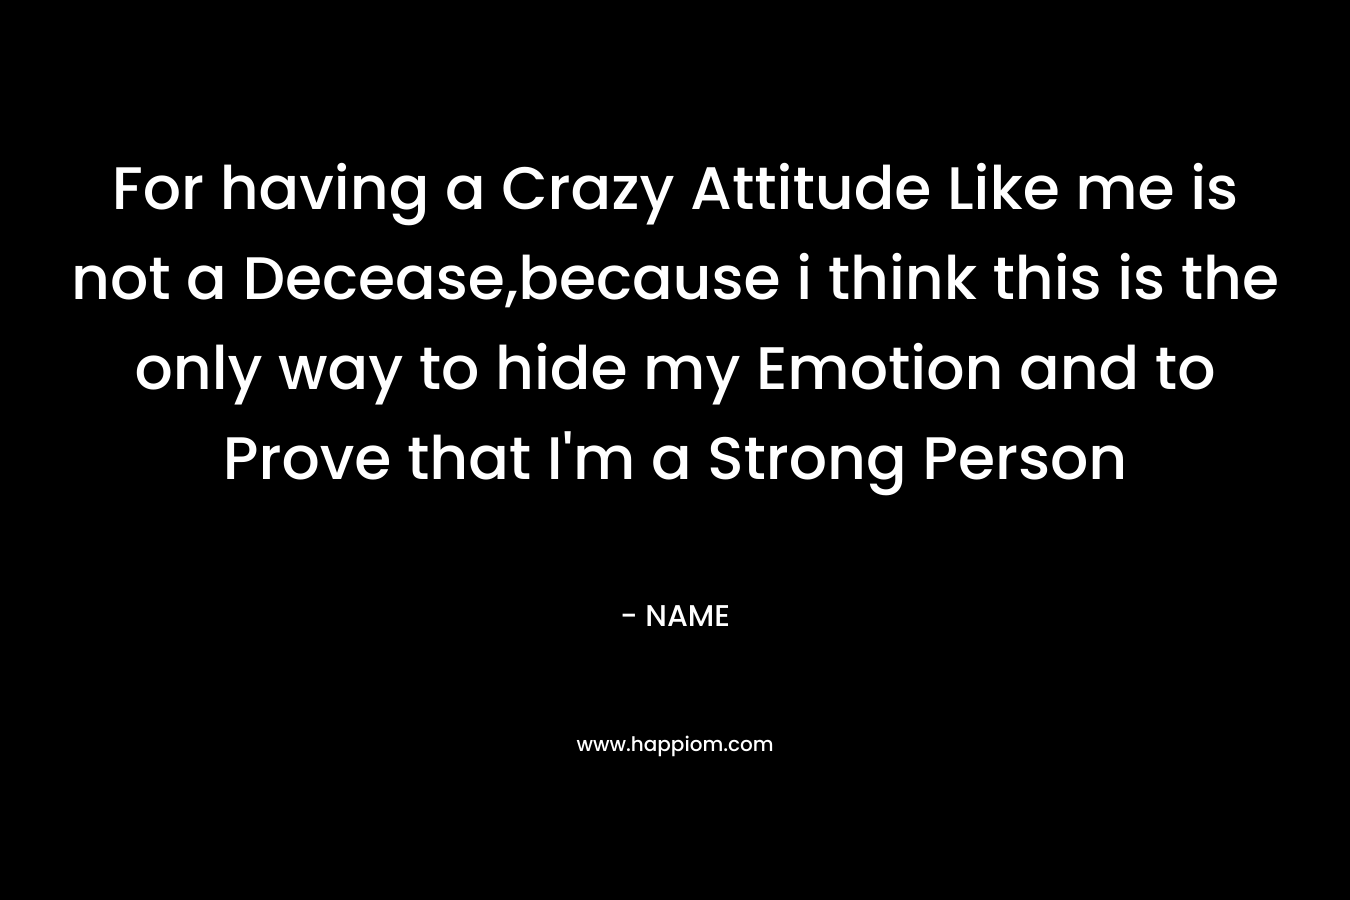 For having a Crazy Attitude Like me is not a Decease,because i think this is the only way to hide my Emotion and to Prove that I'm a Strong Person